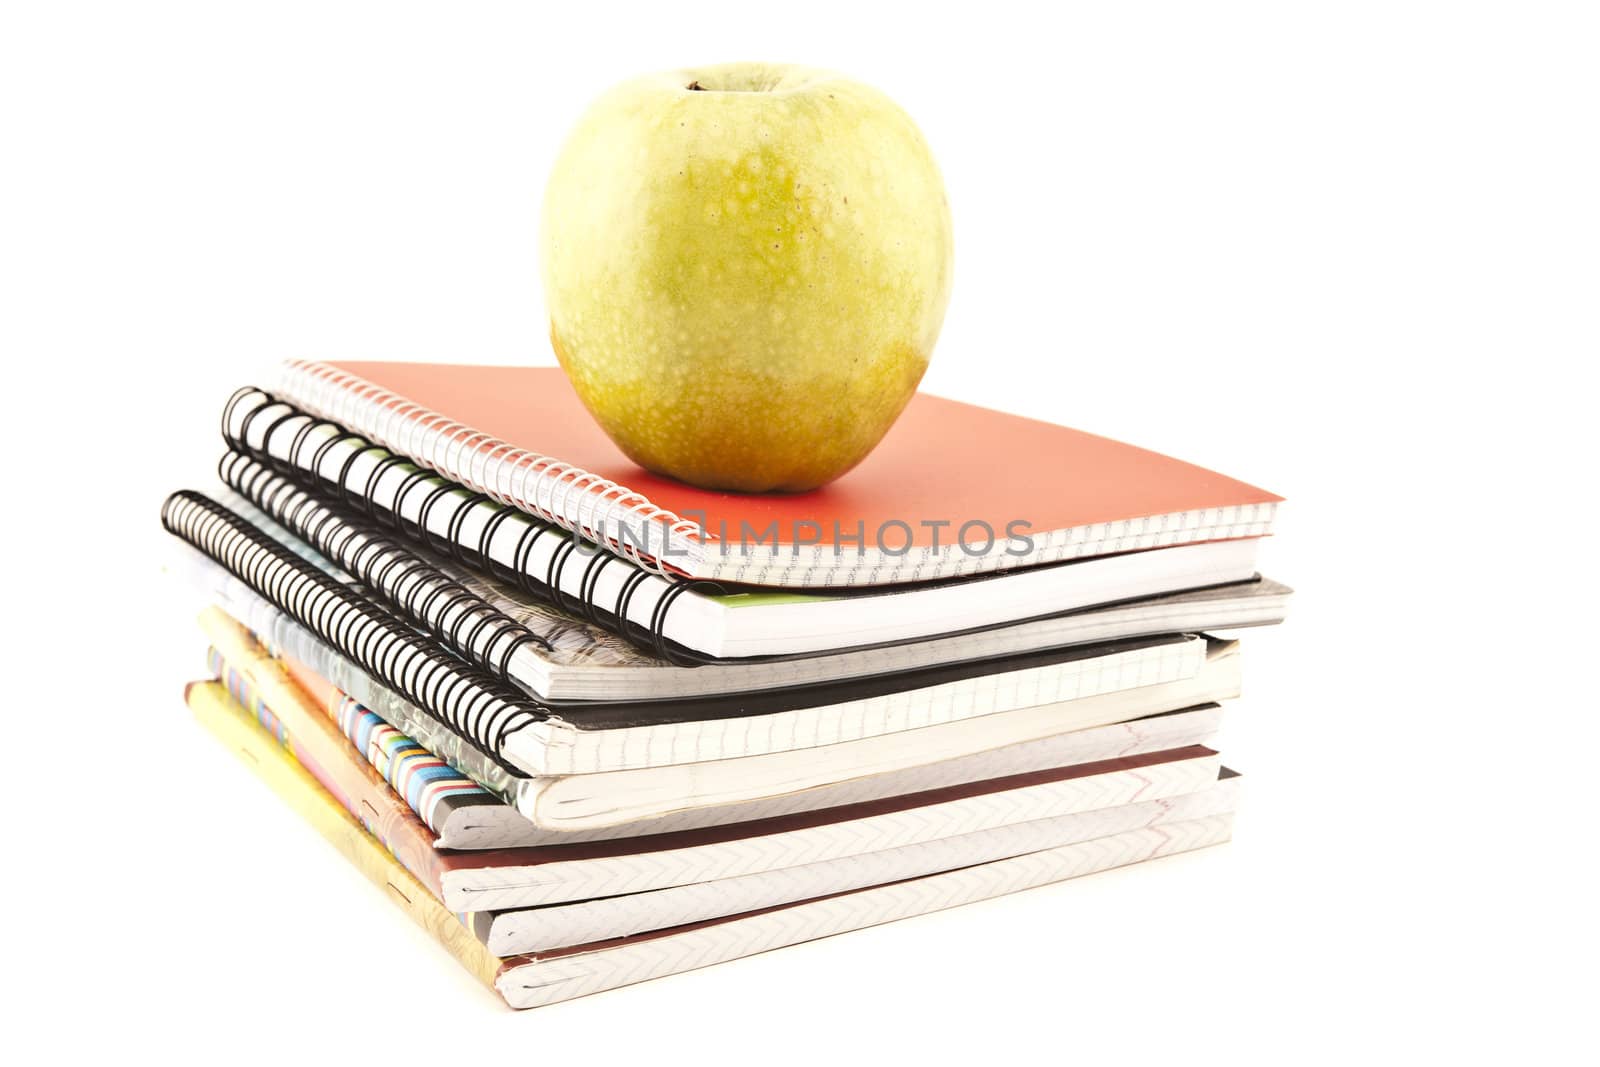 Notebook stack and apple. Schoolchild and student studies accessories. Back to school concept.